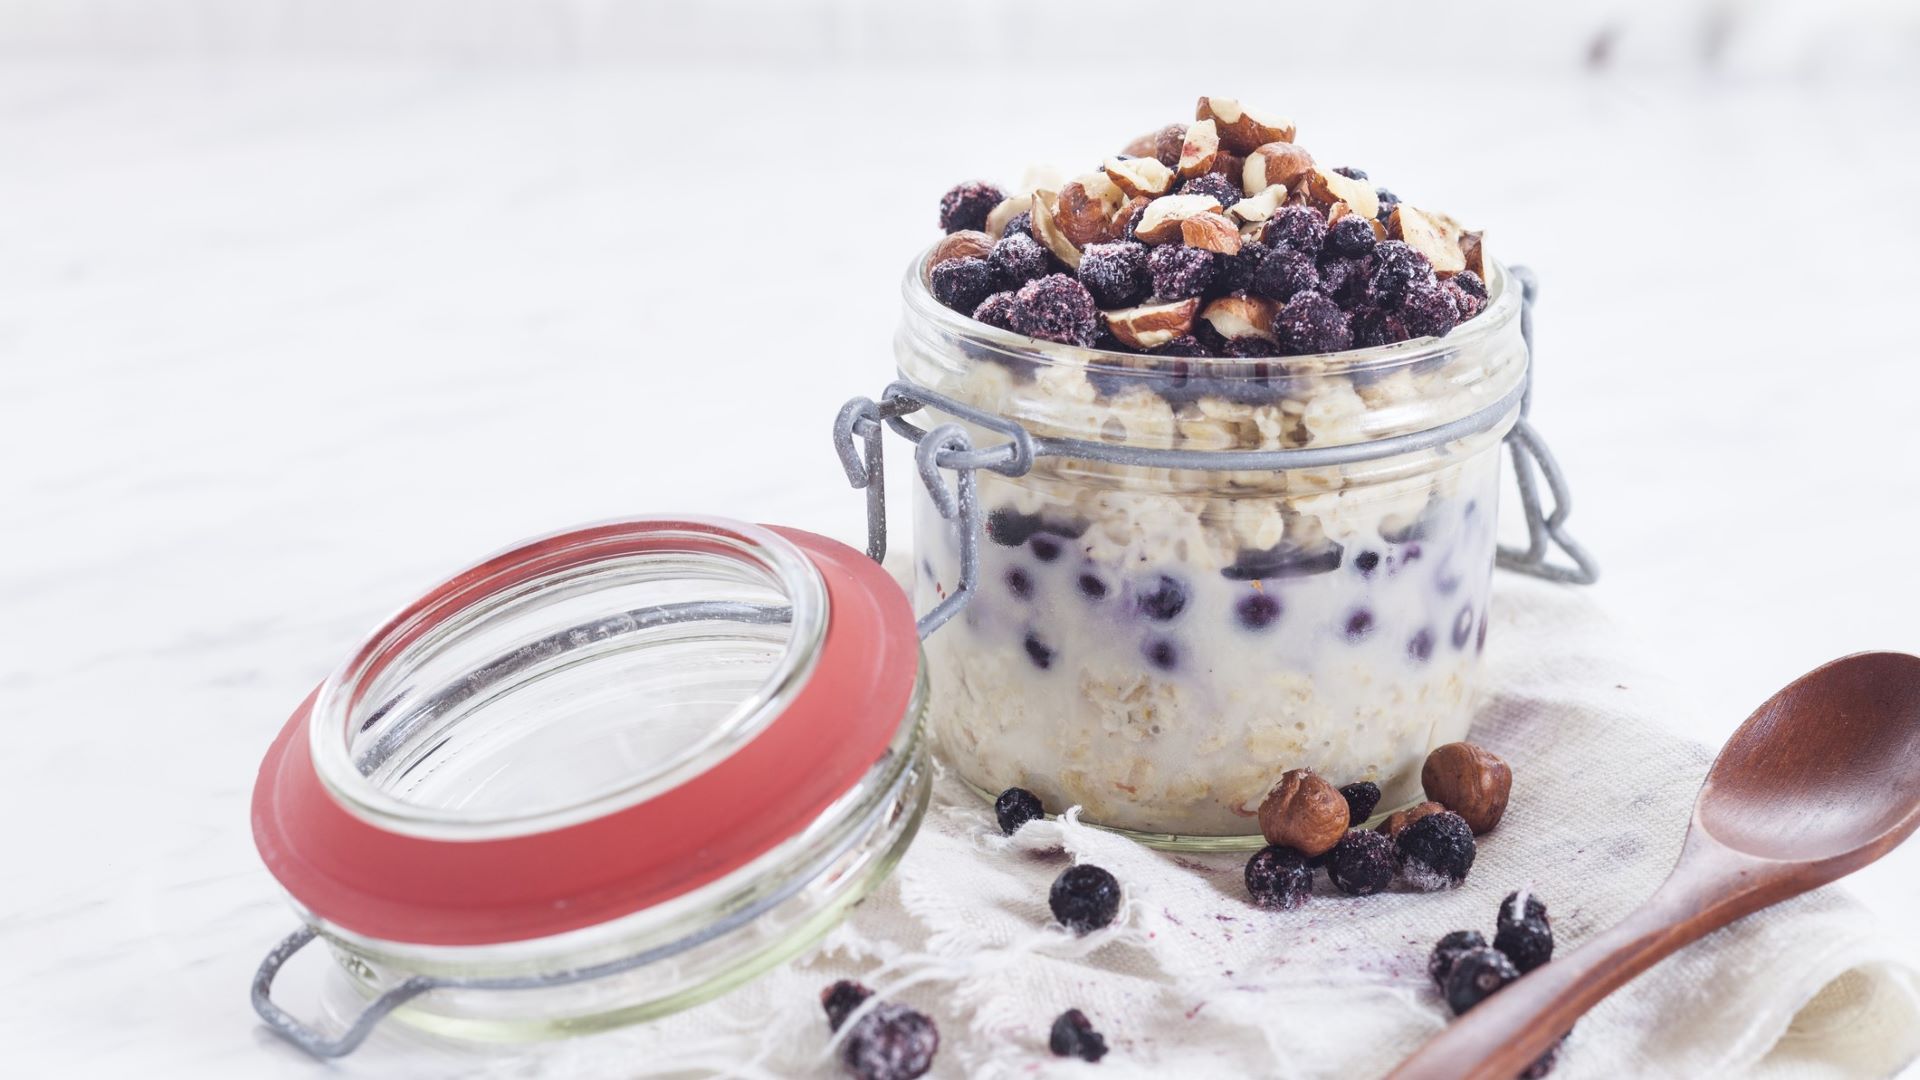 This dietitian's simple overnight oats recipe delivers…